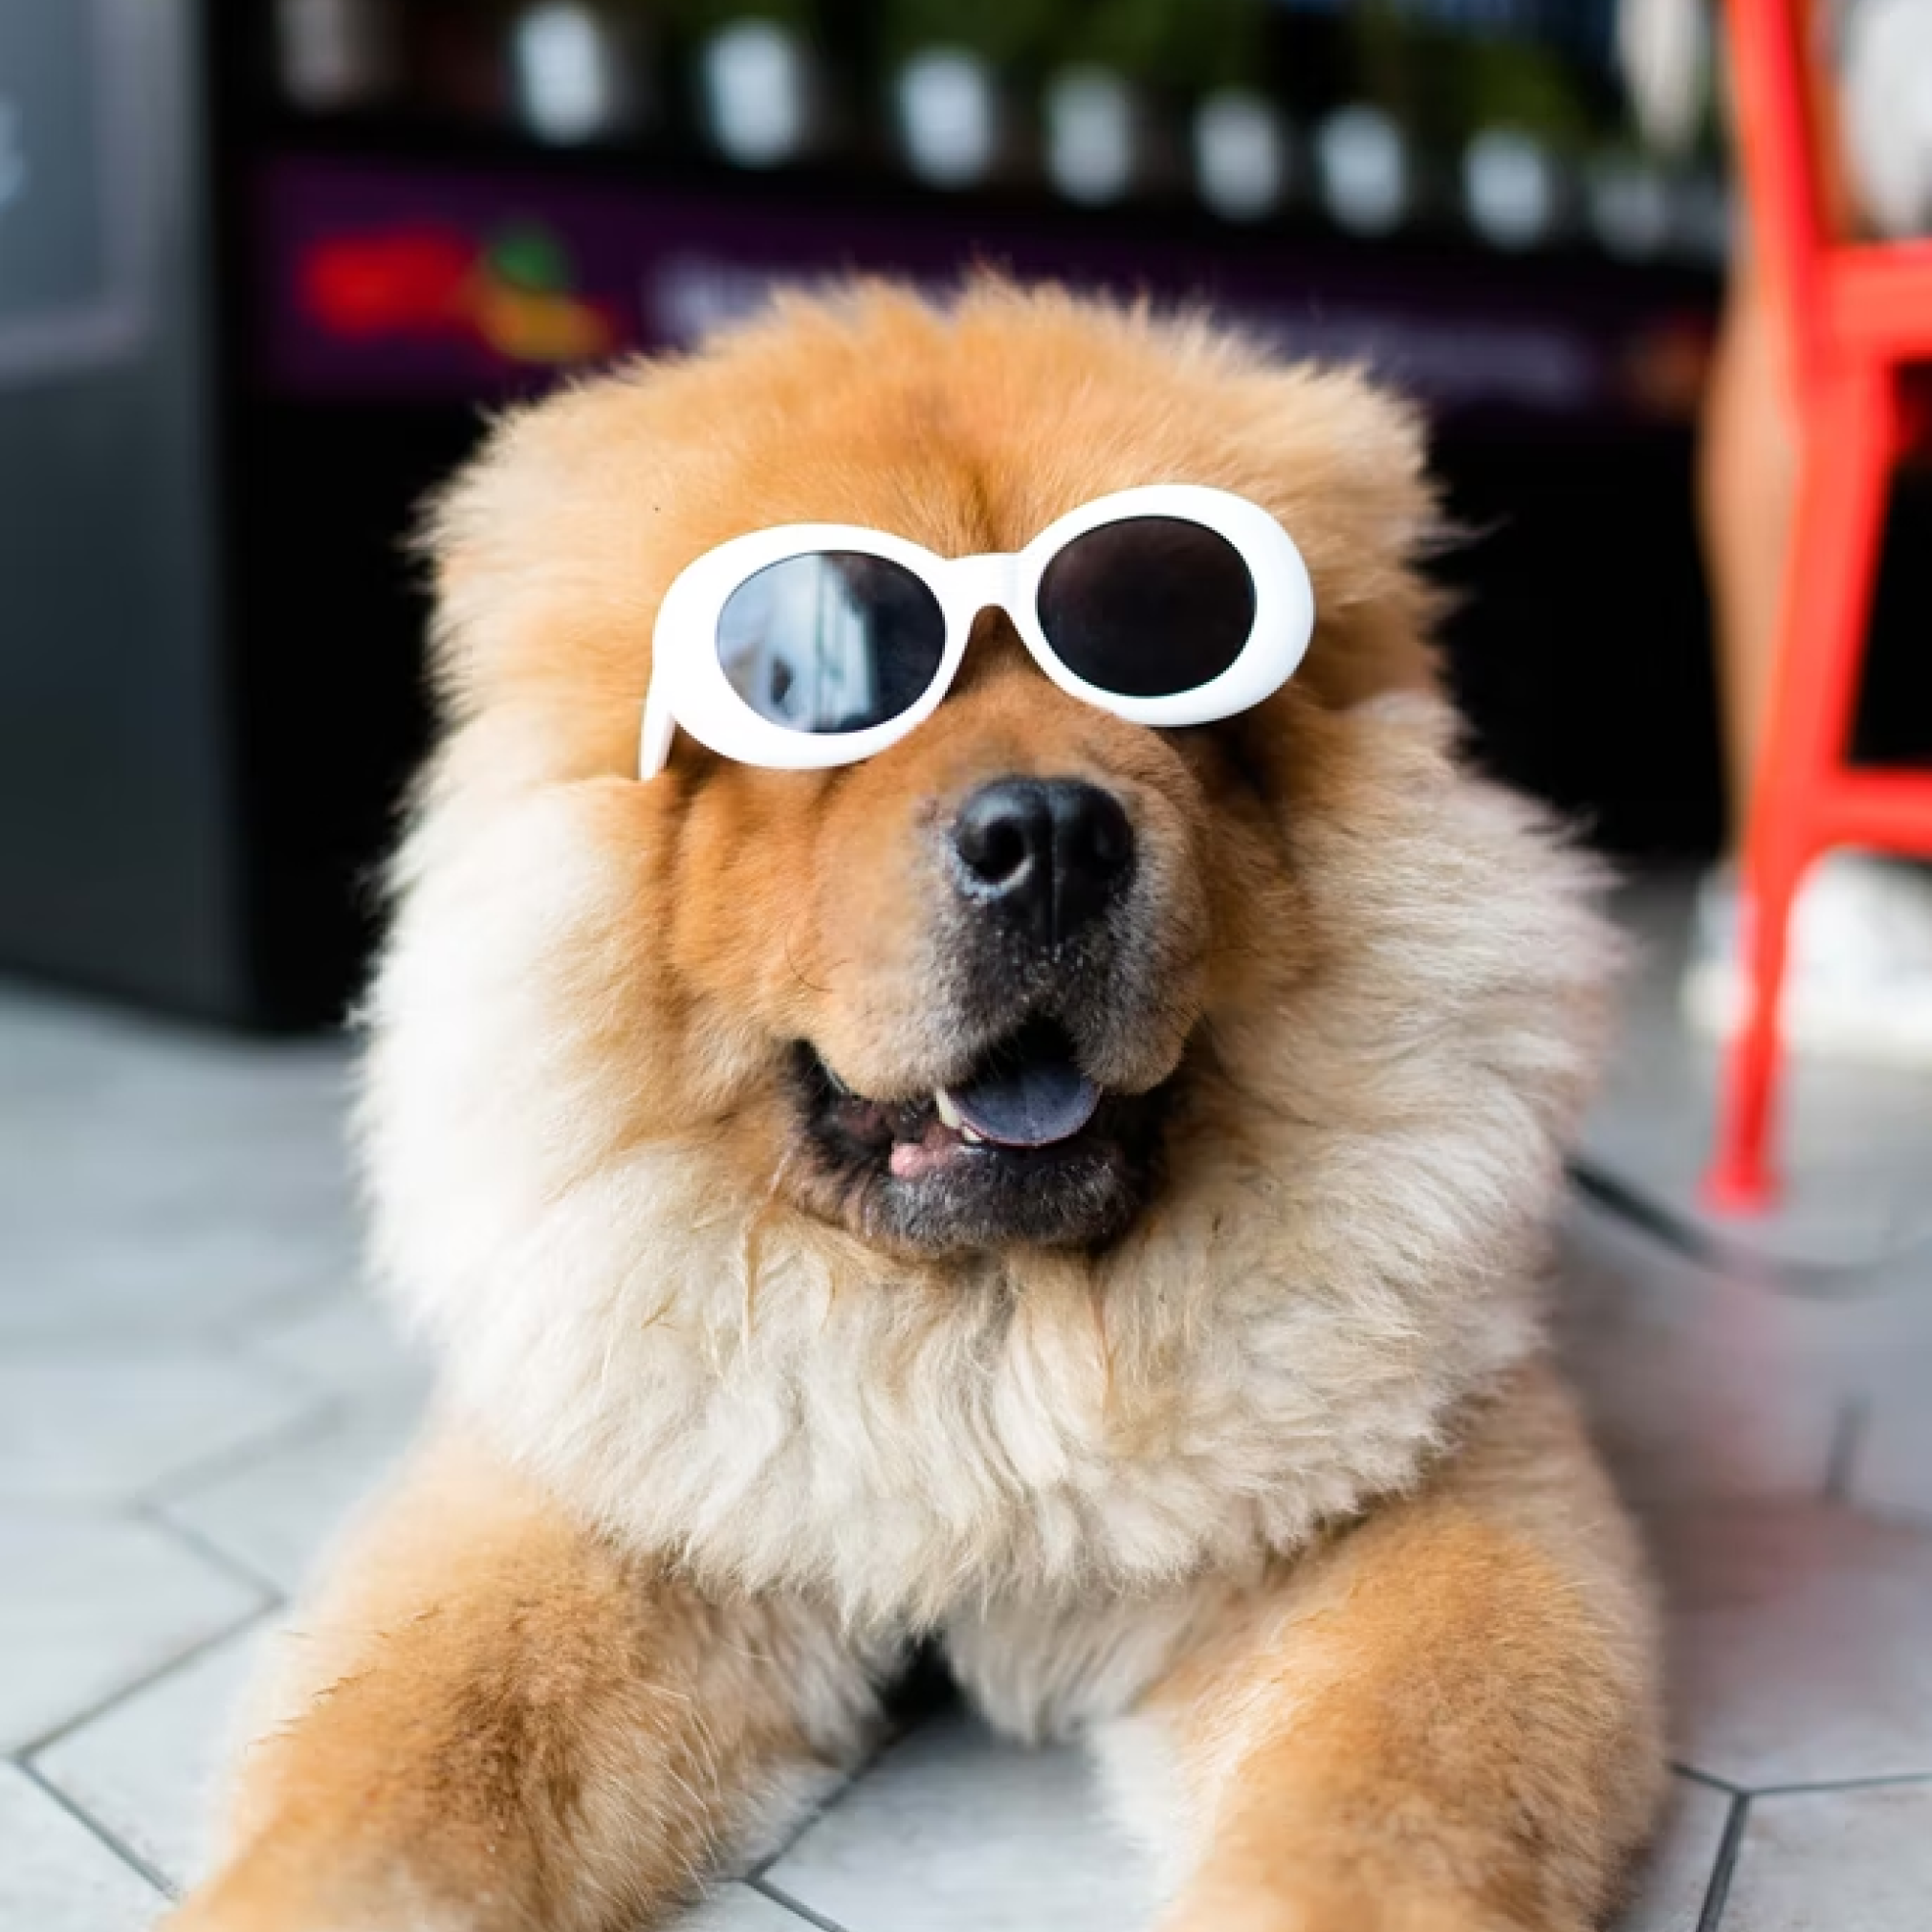 Chow chow dog on ground sitting with sunglasses.